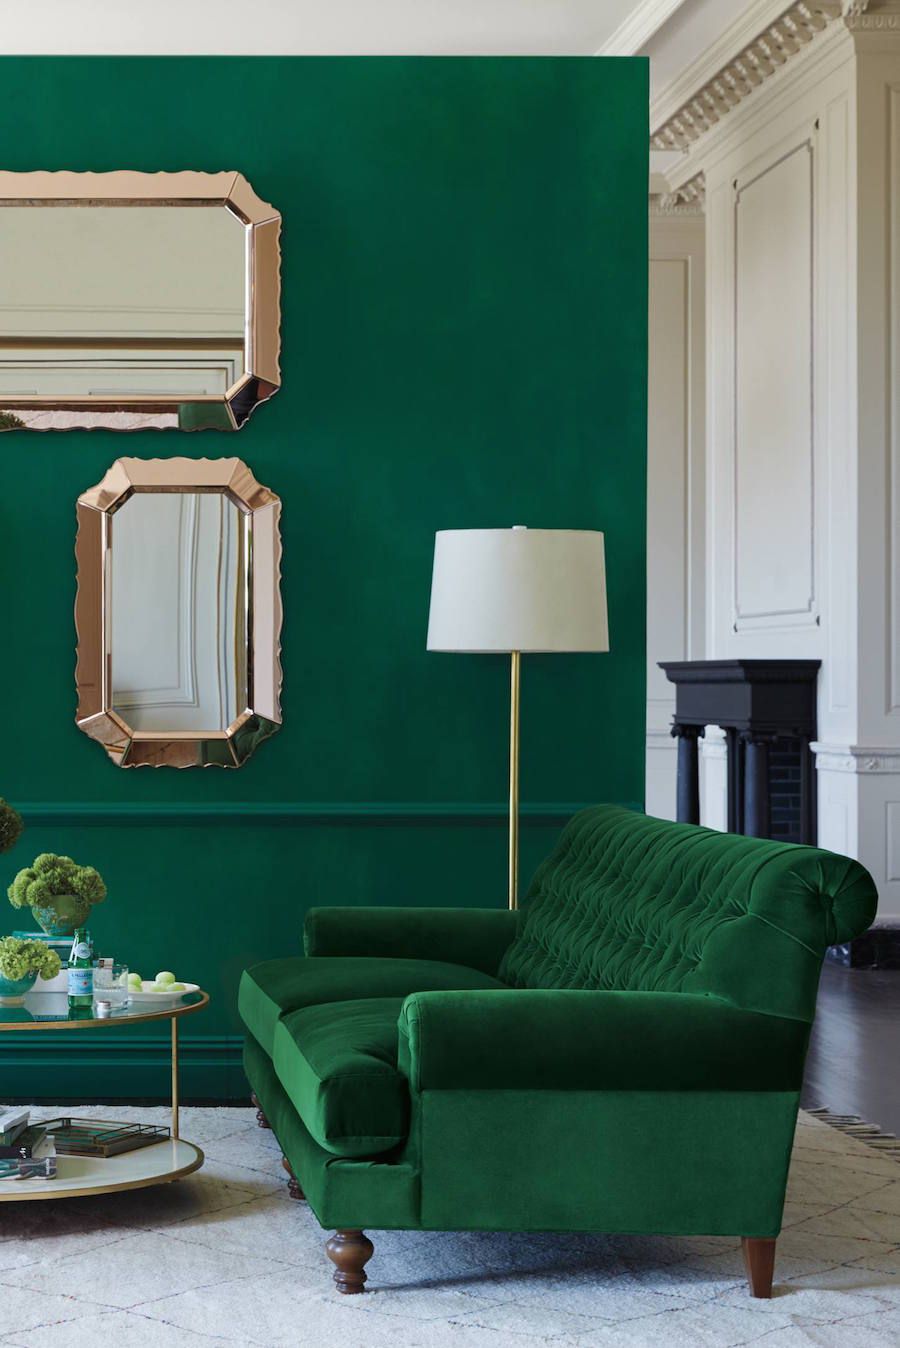 This jewel-tone green living room makes a major style statement.